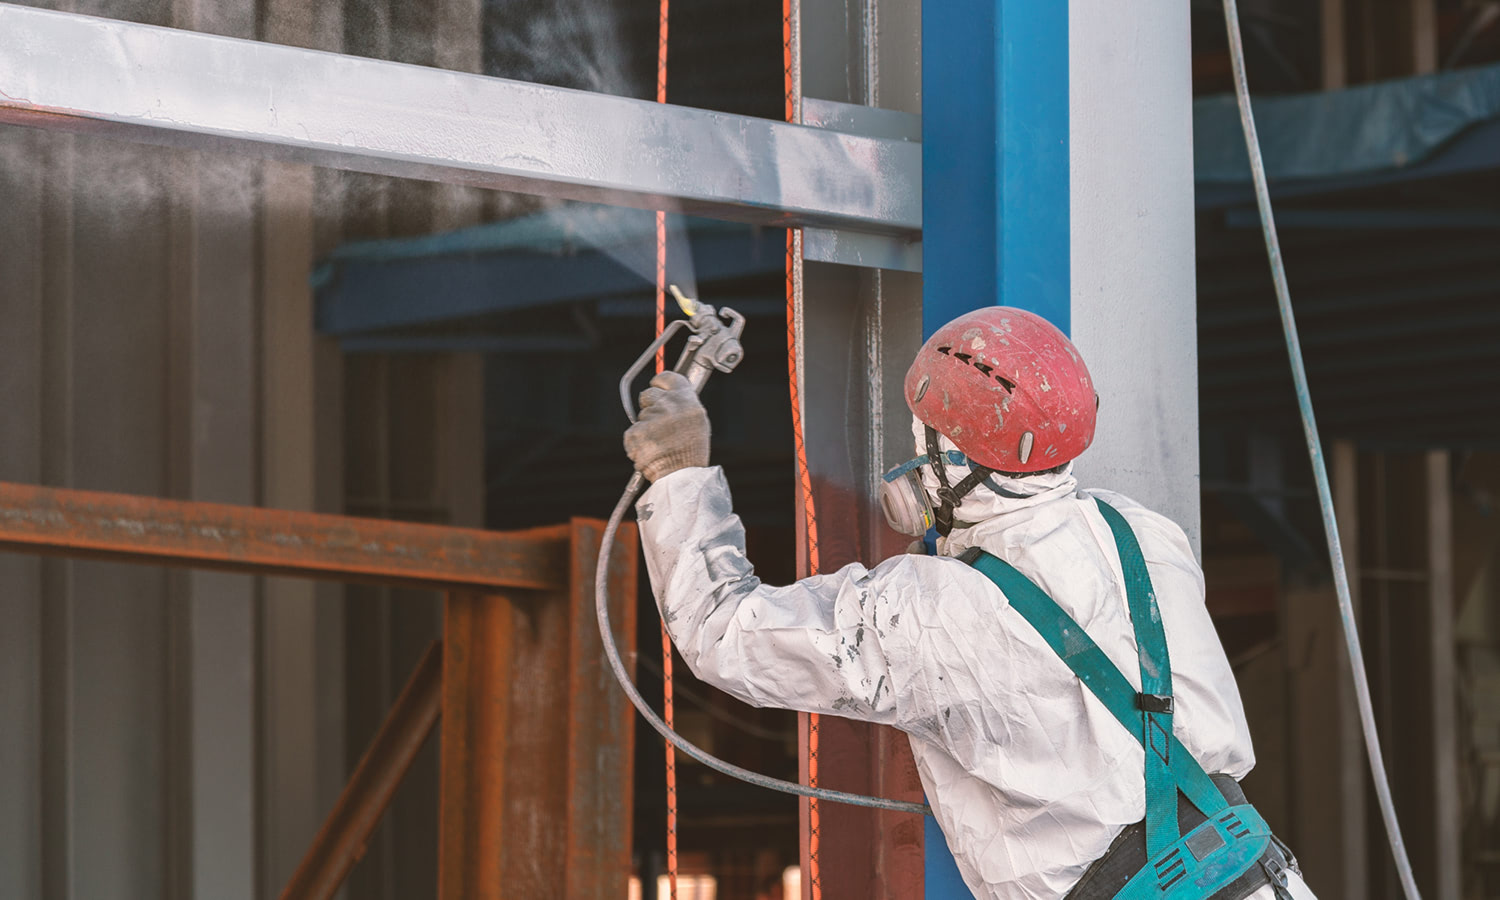 Worker paints a metal frame at construction site